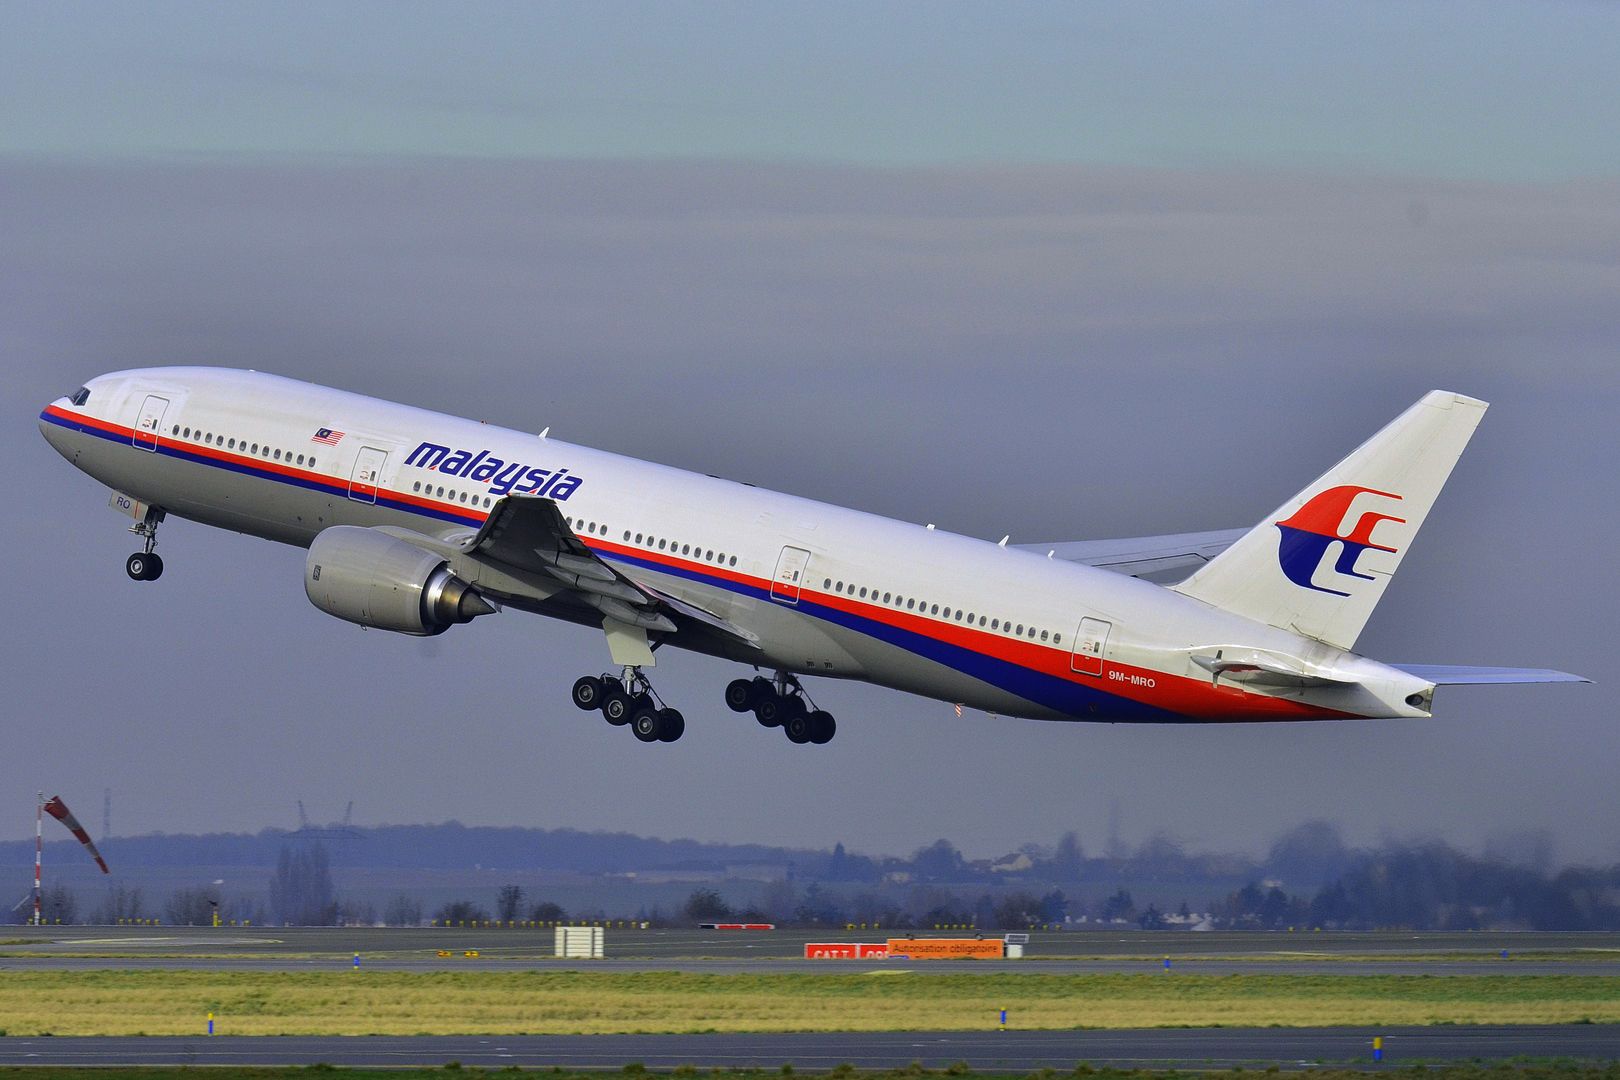 More details Malaysia Airlines Boeing 777-200ER (9M-MRO) taking off at Roissy-Charles de Gaulle Airport (LFPG) in France.